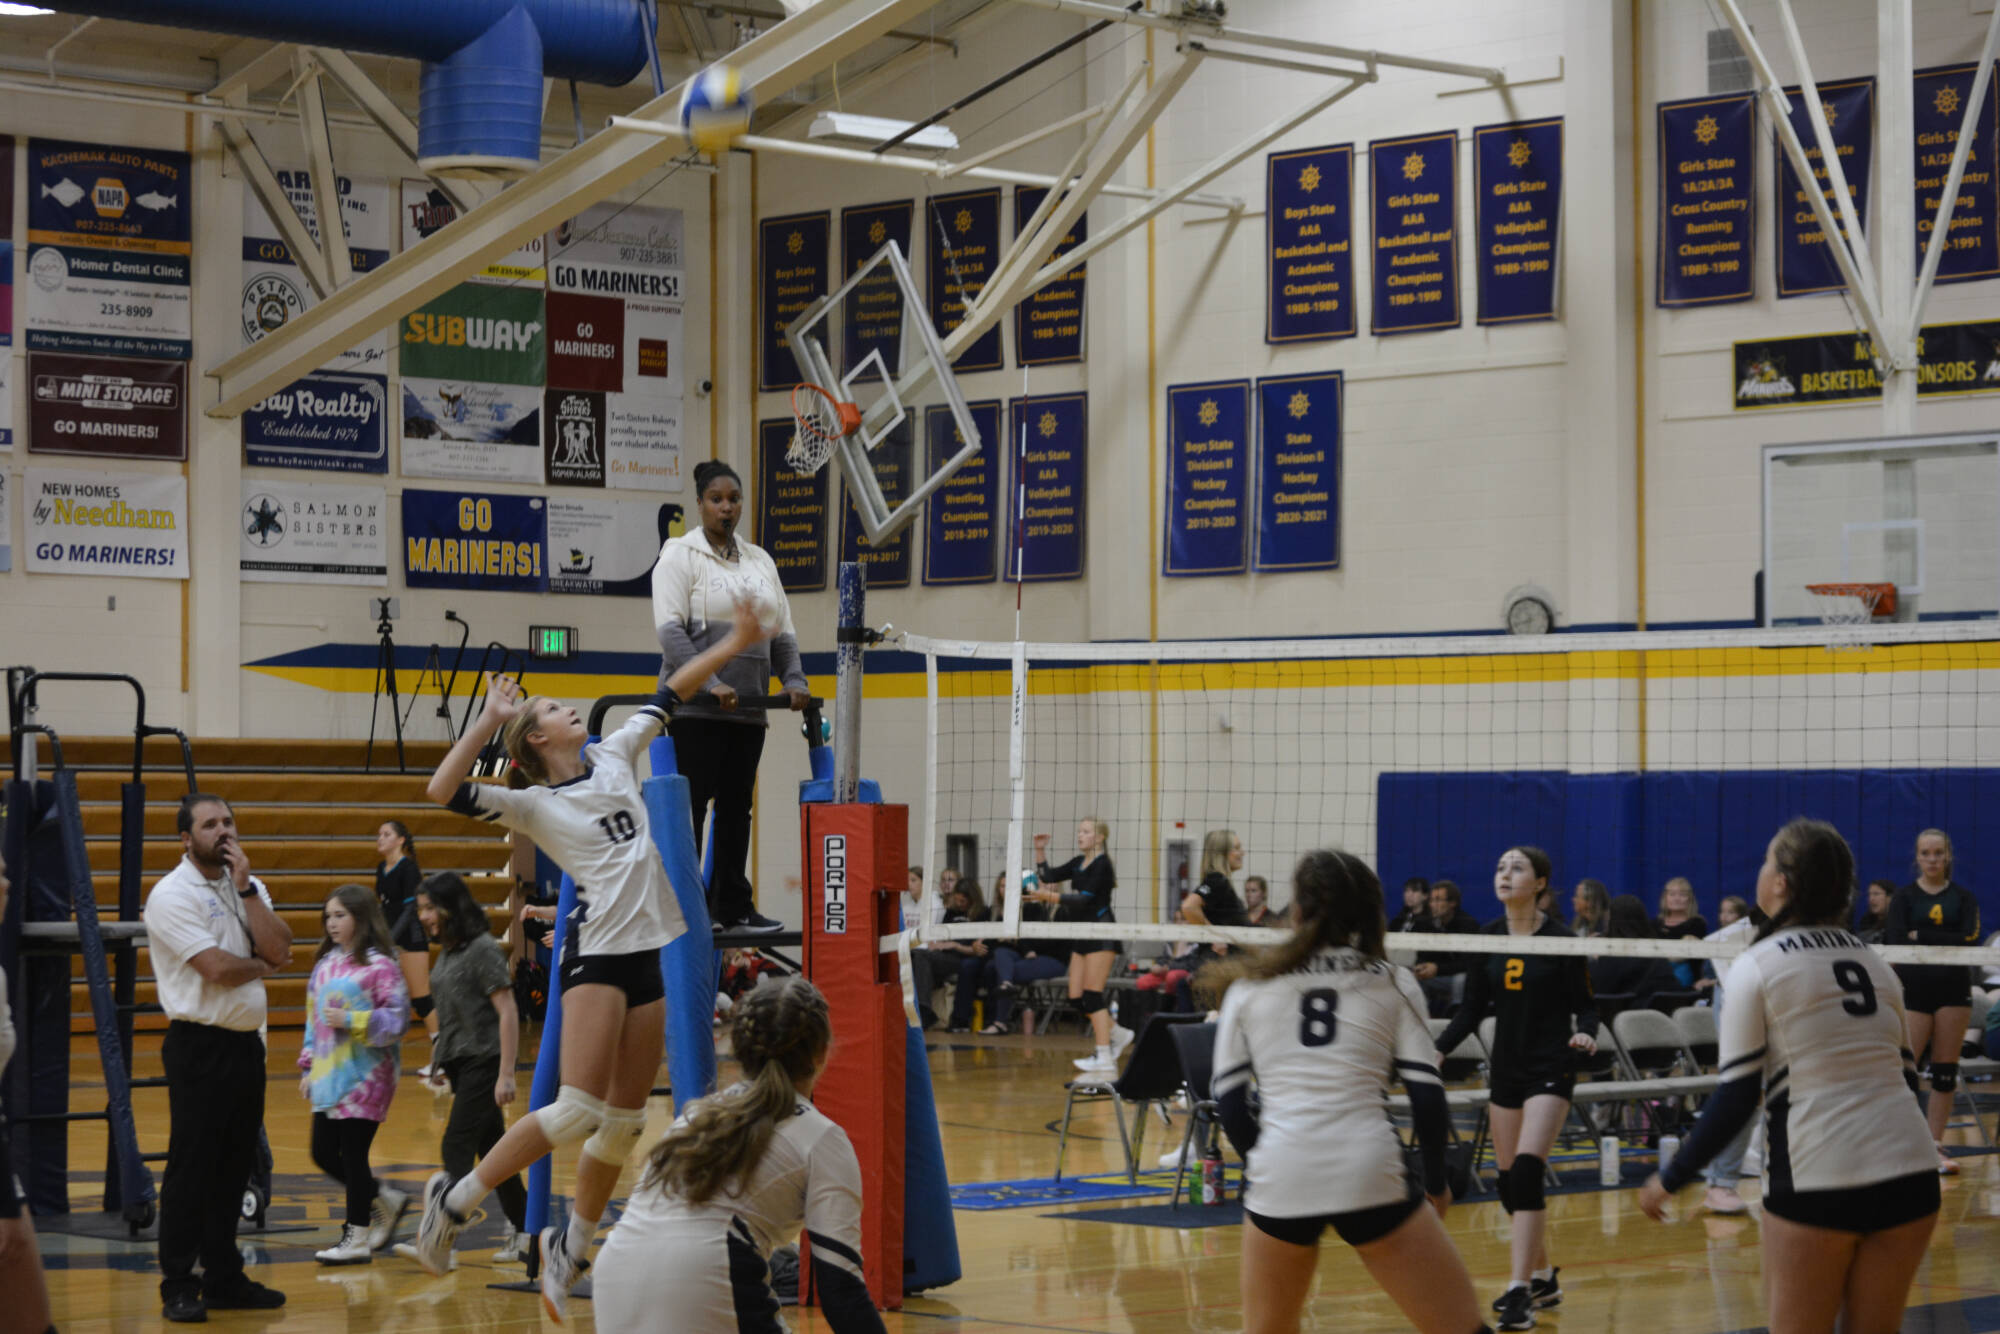 Junior Varsity player about to spike on Saturday, Aug. 20, 2022, at Homer High School in Homer, Alaska. (Photo by Charlie Menke/ Homer News)